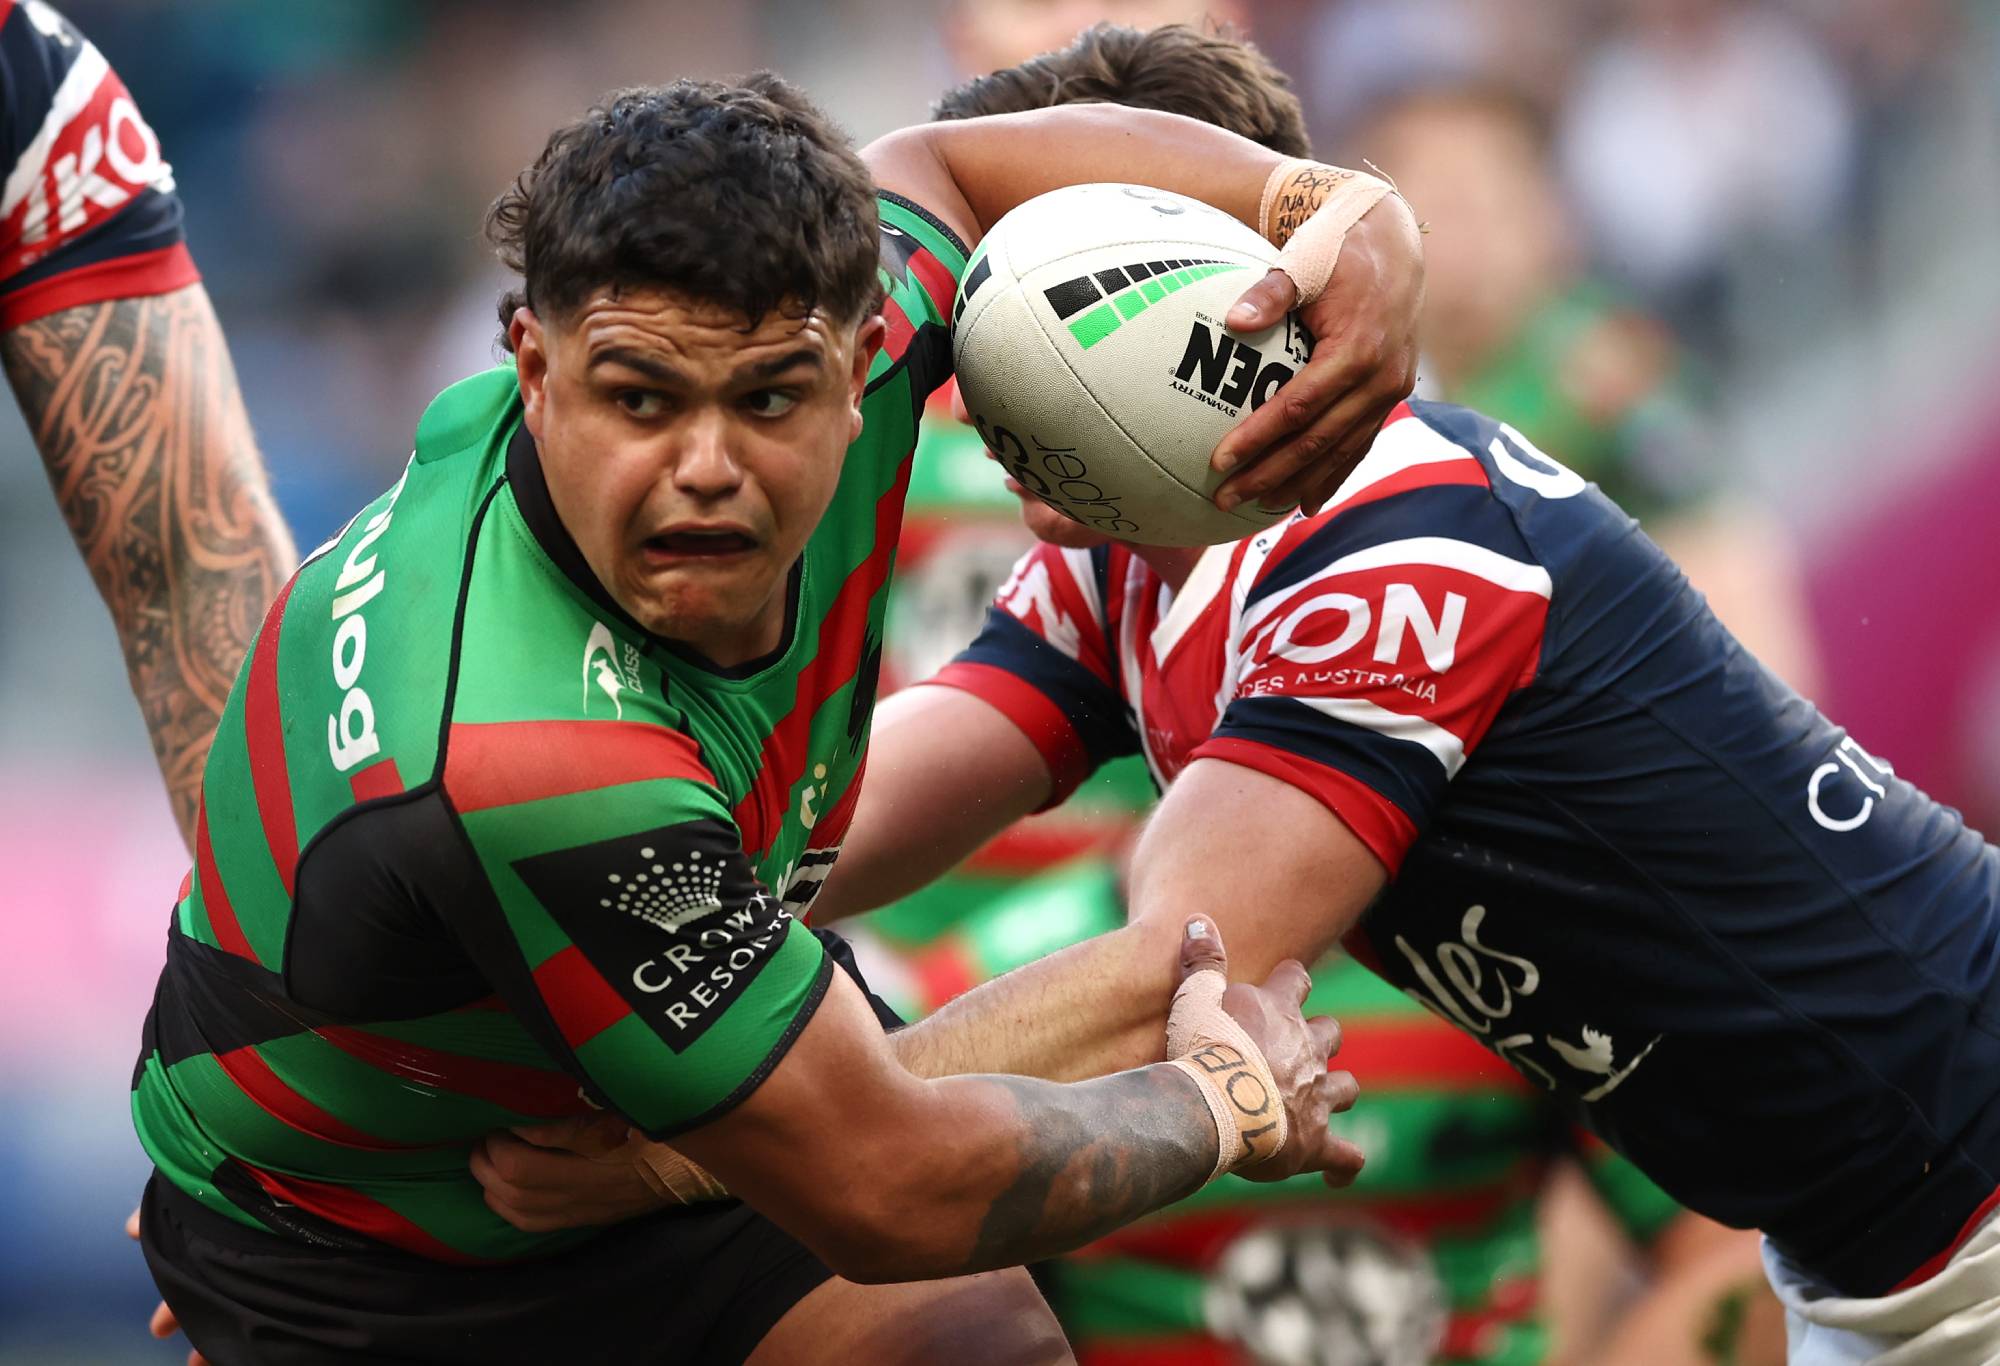 SYDNEY, AUSTRALIA - SEPTEMBER 11: Latrell Mitchell of the Rabbitohs is tackled during the NRL Elimination Final match between the Sydney Roosters and the South Sydney Rabbitohs at Allianz Stadium on September 11, 2022 in Sydney, Australia. (Photo by Matt King/Getty Images)